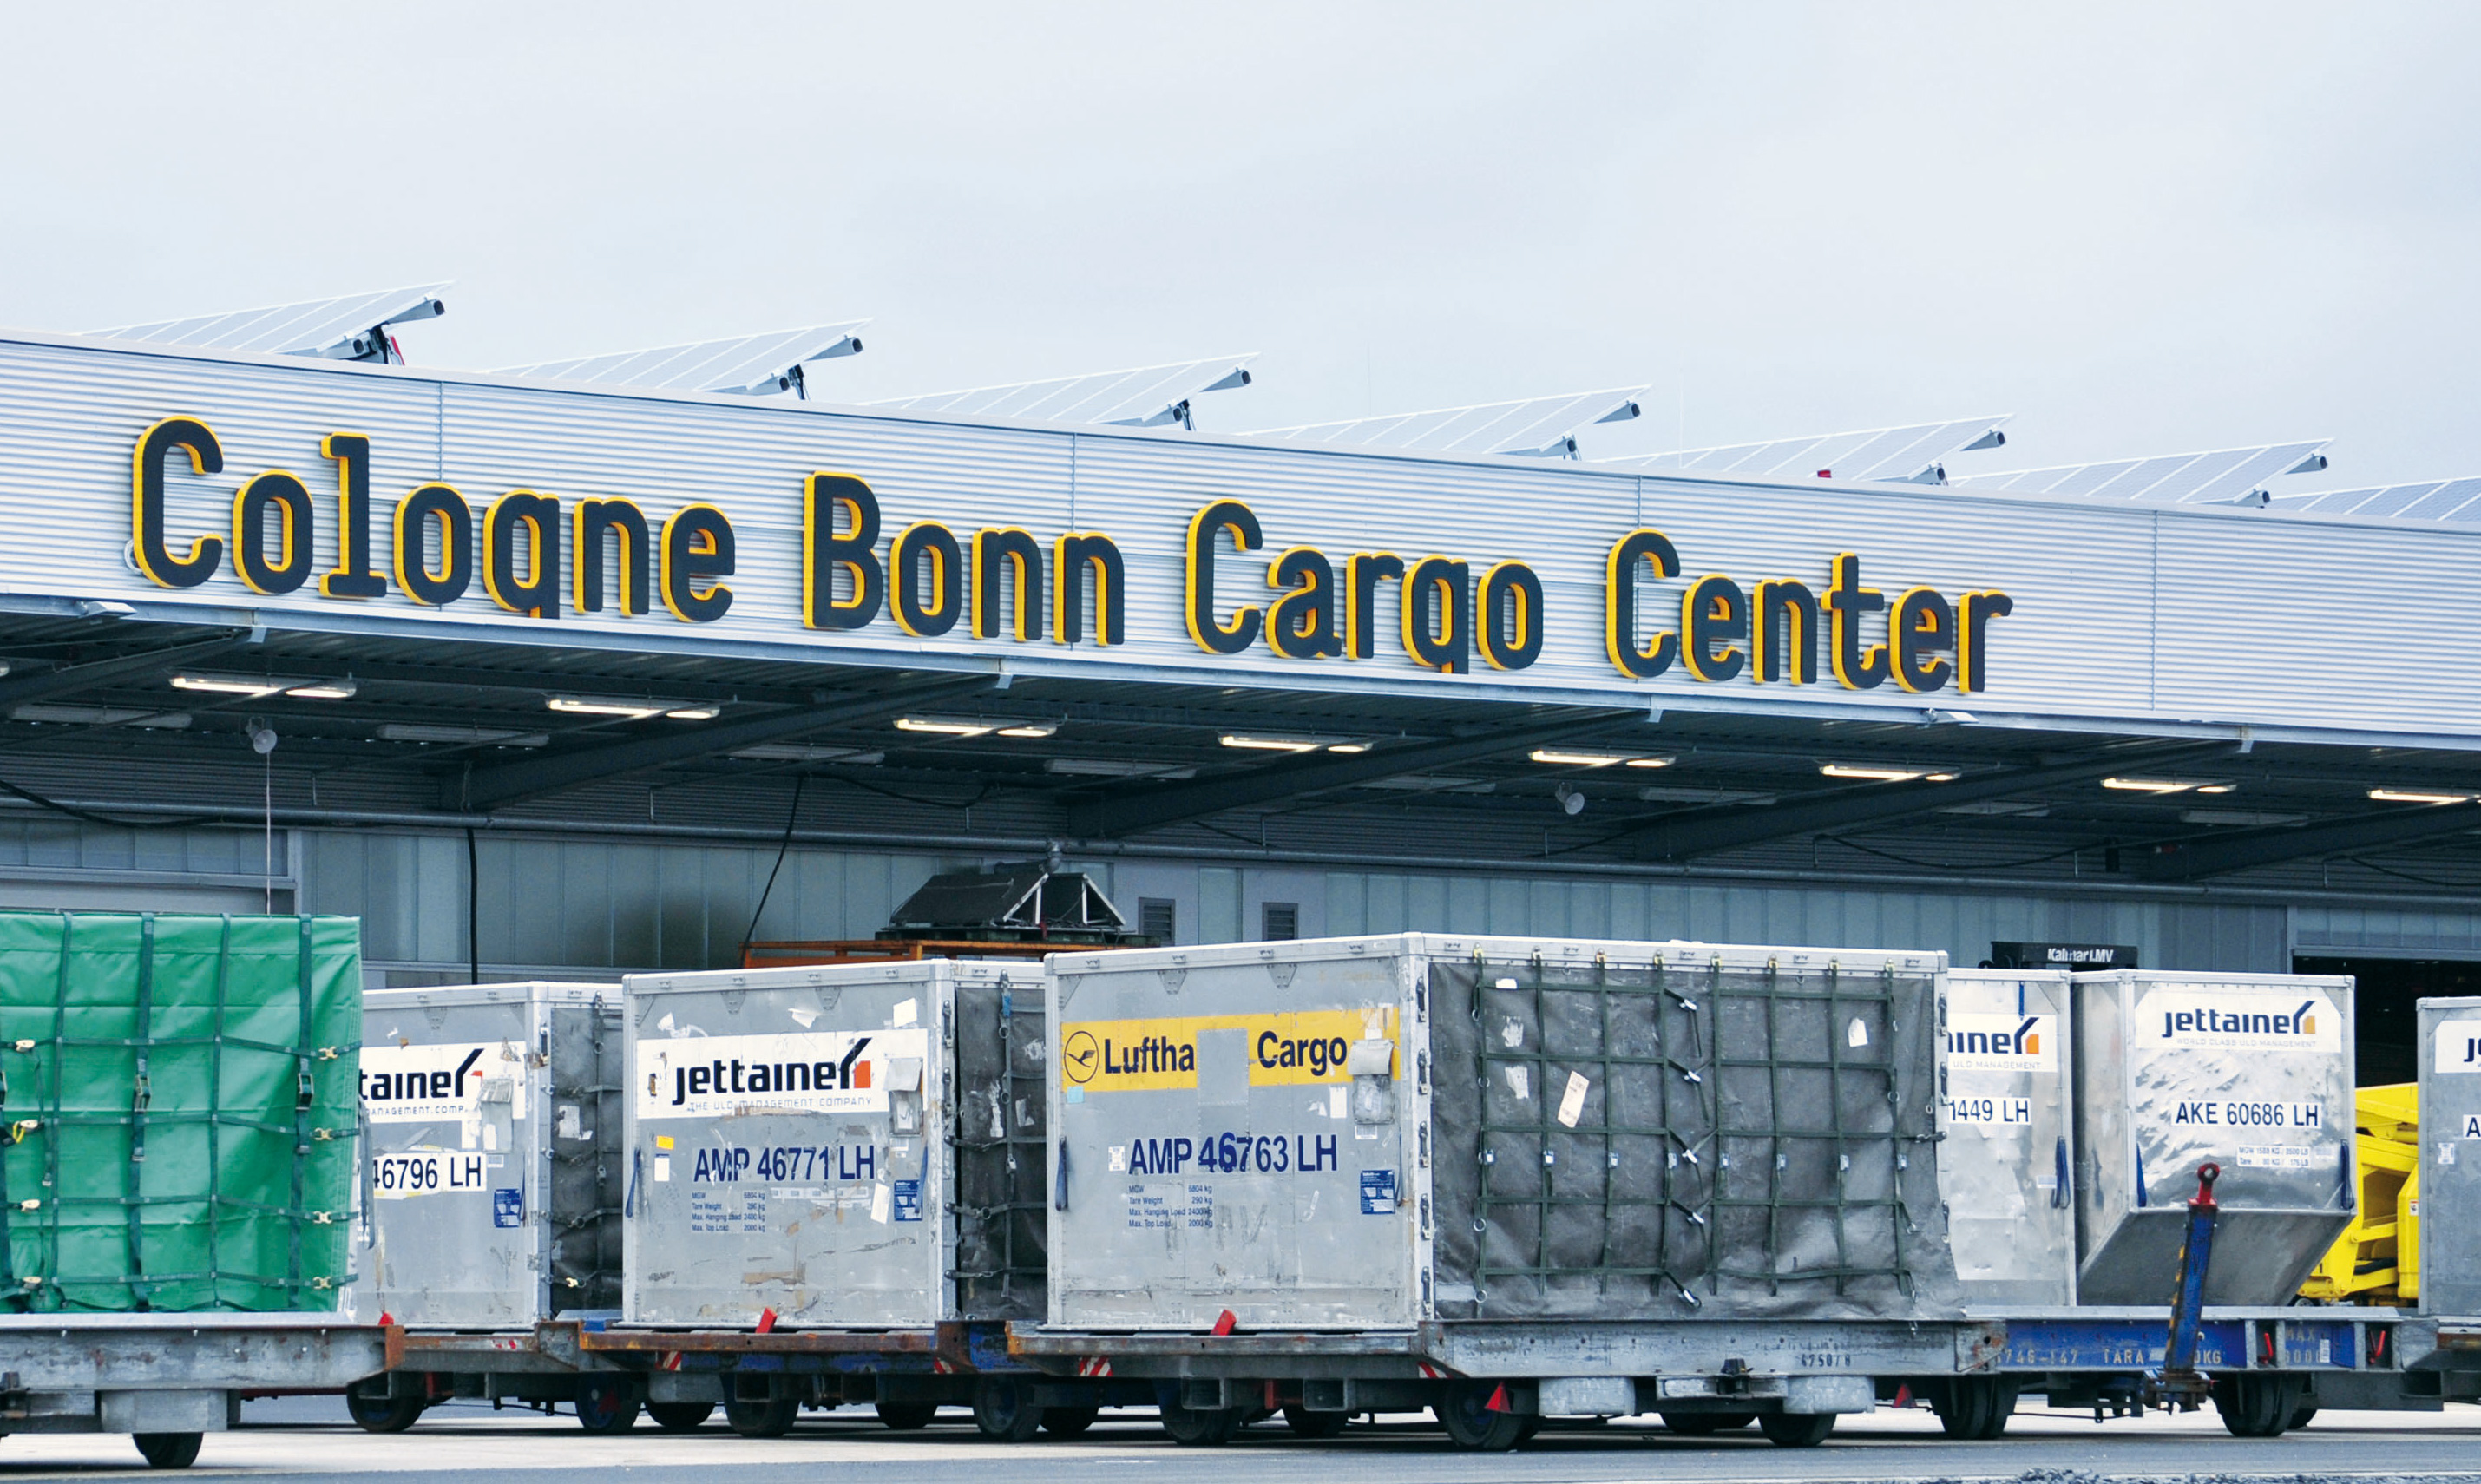 dnata to acquire cargo handling operation at Cologne Bonn